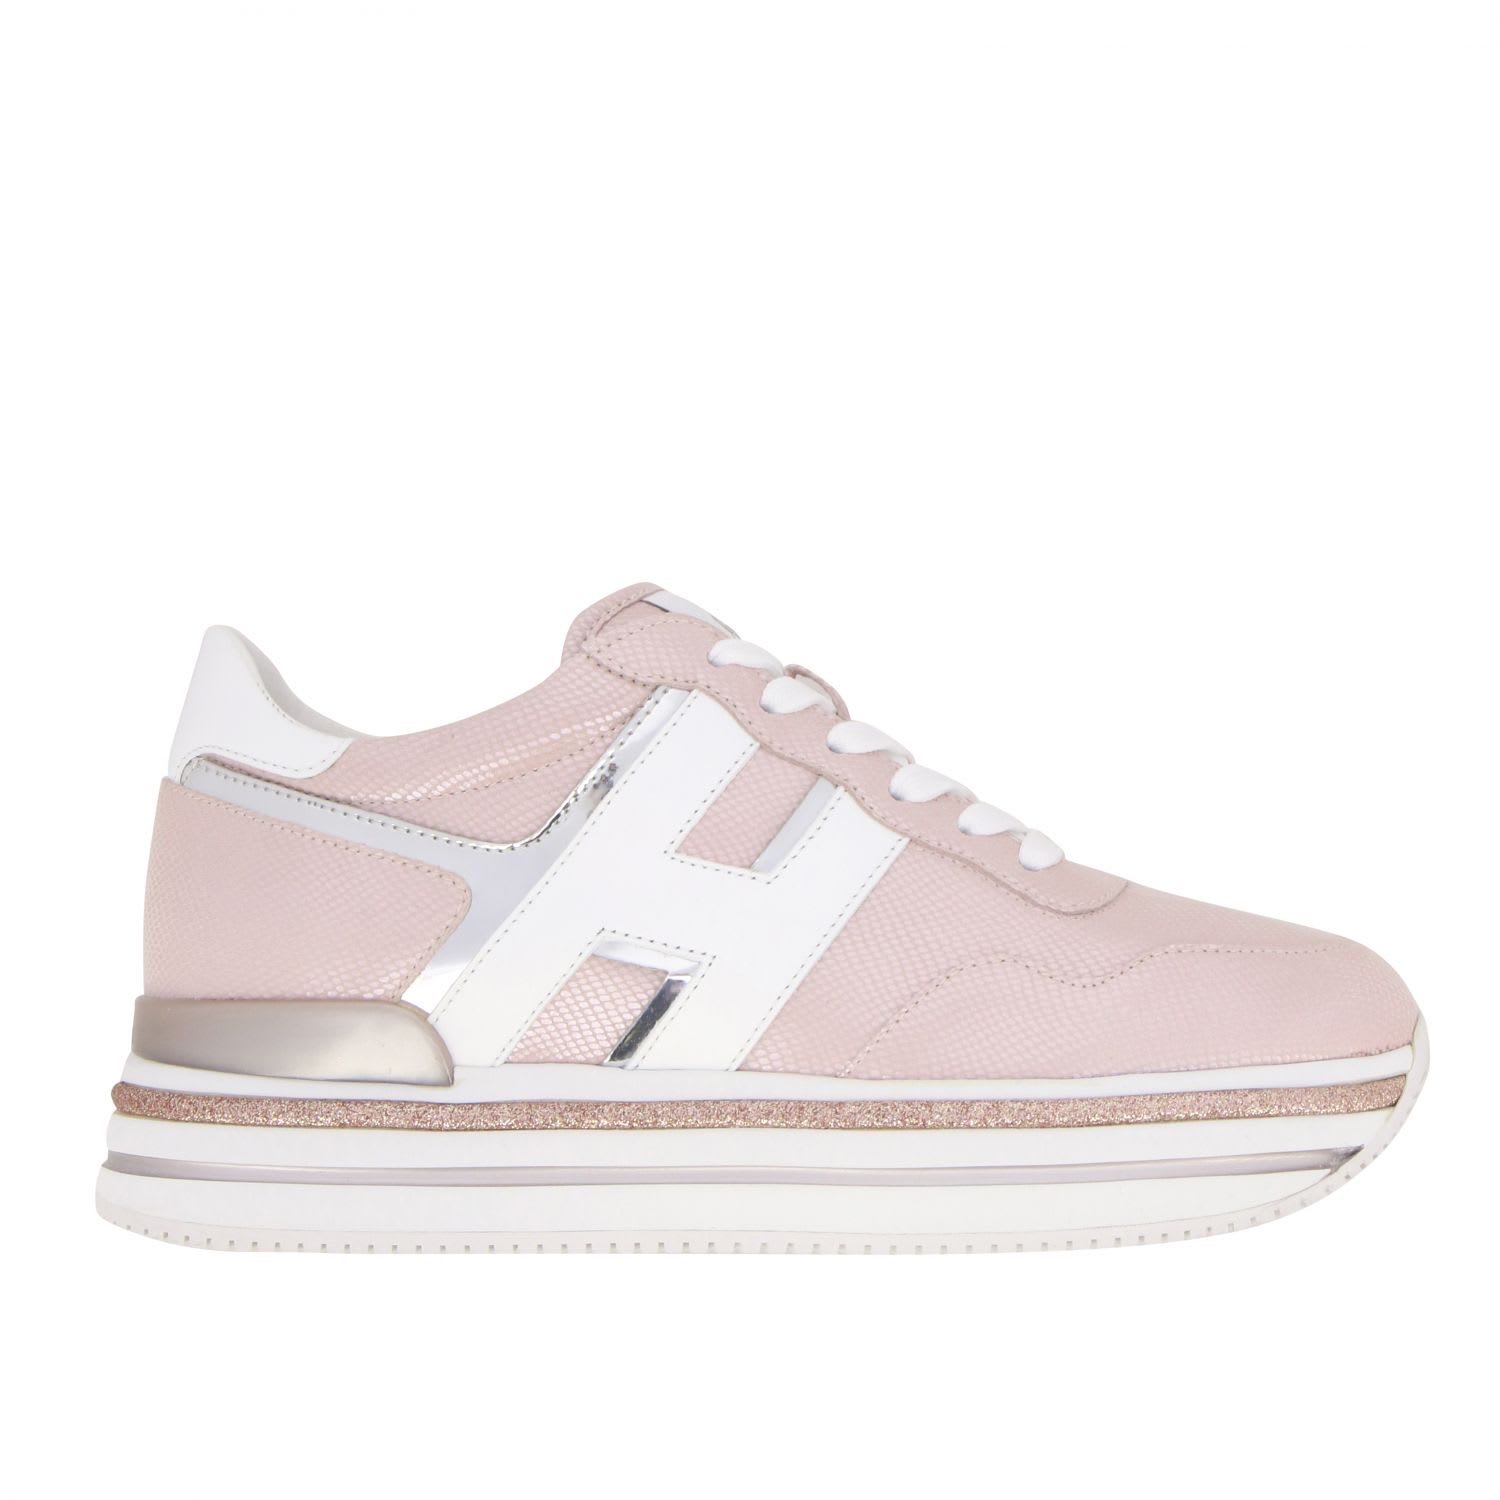 Hogan 468 Midi Platform Trainers In Leather With Big H And Glitter Piping In Pink